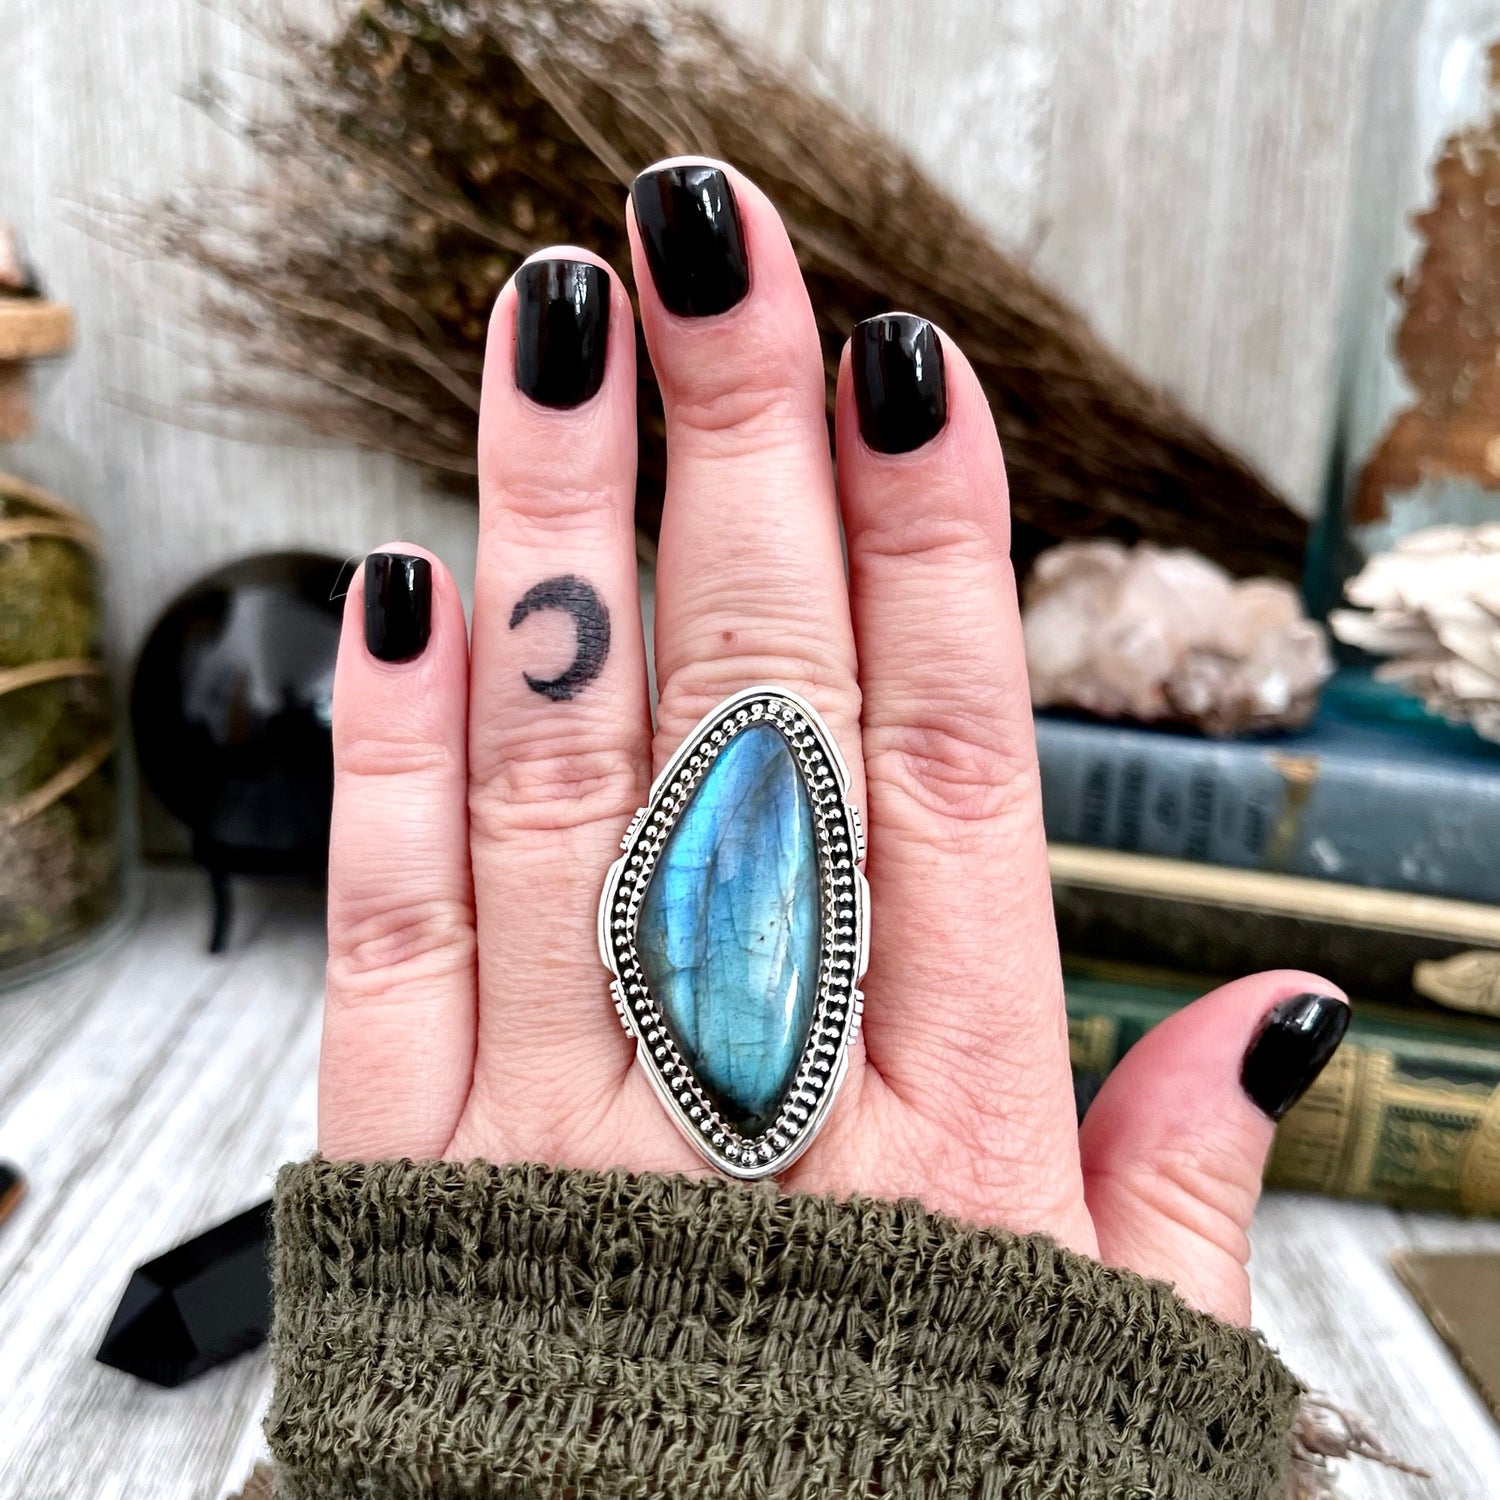 Big Labradorite Crystal Statement Ring in Sterling Silver - Designed by FOXLARK Collection Adjusts to size 6,7,8,9, or 10 | Blue Stone